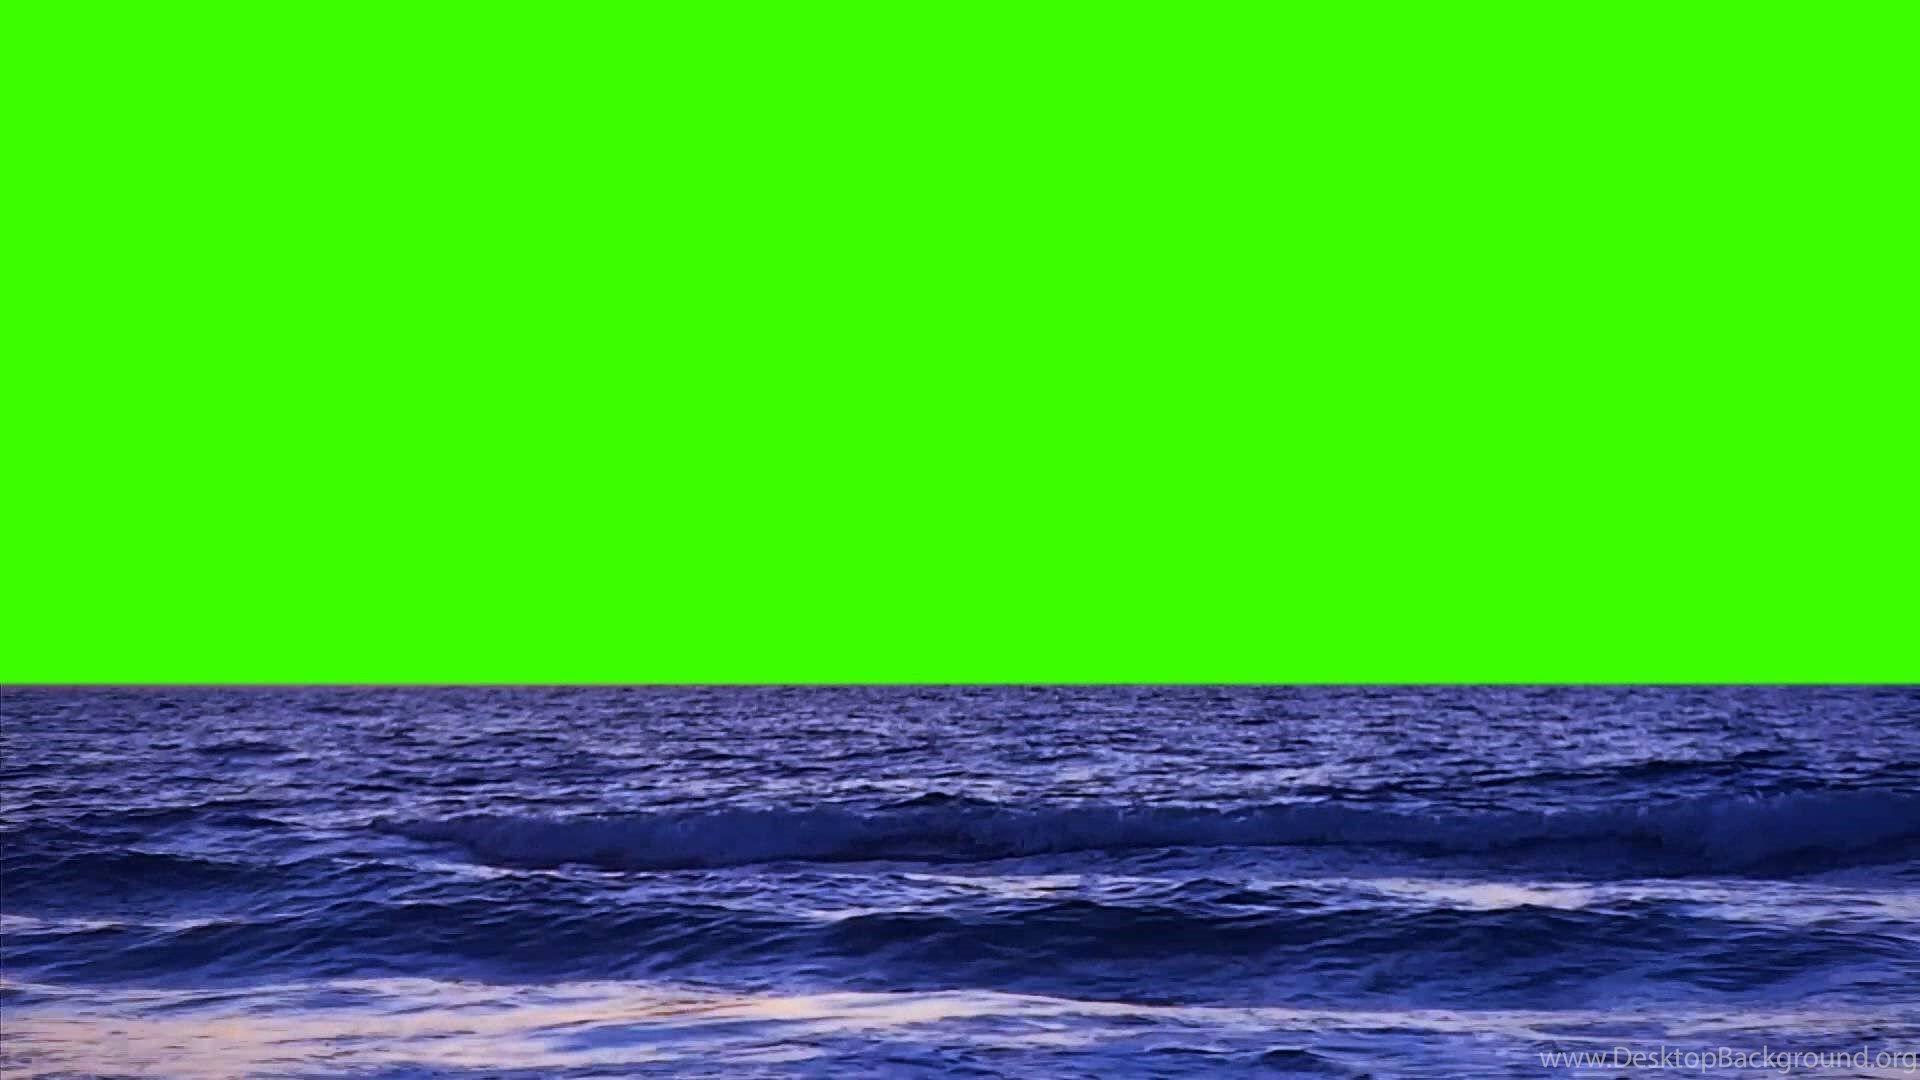 The Sea On A Green Screen Backgrounds Royalty Free Footage YouTube.